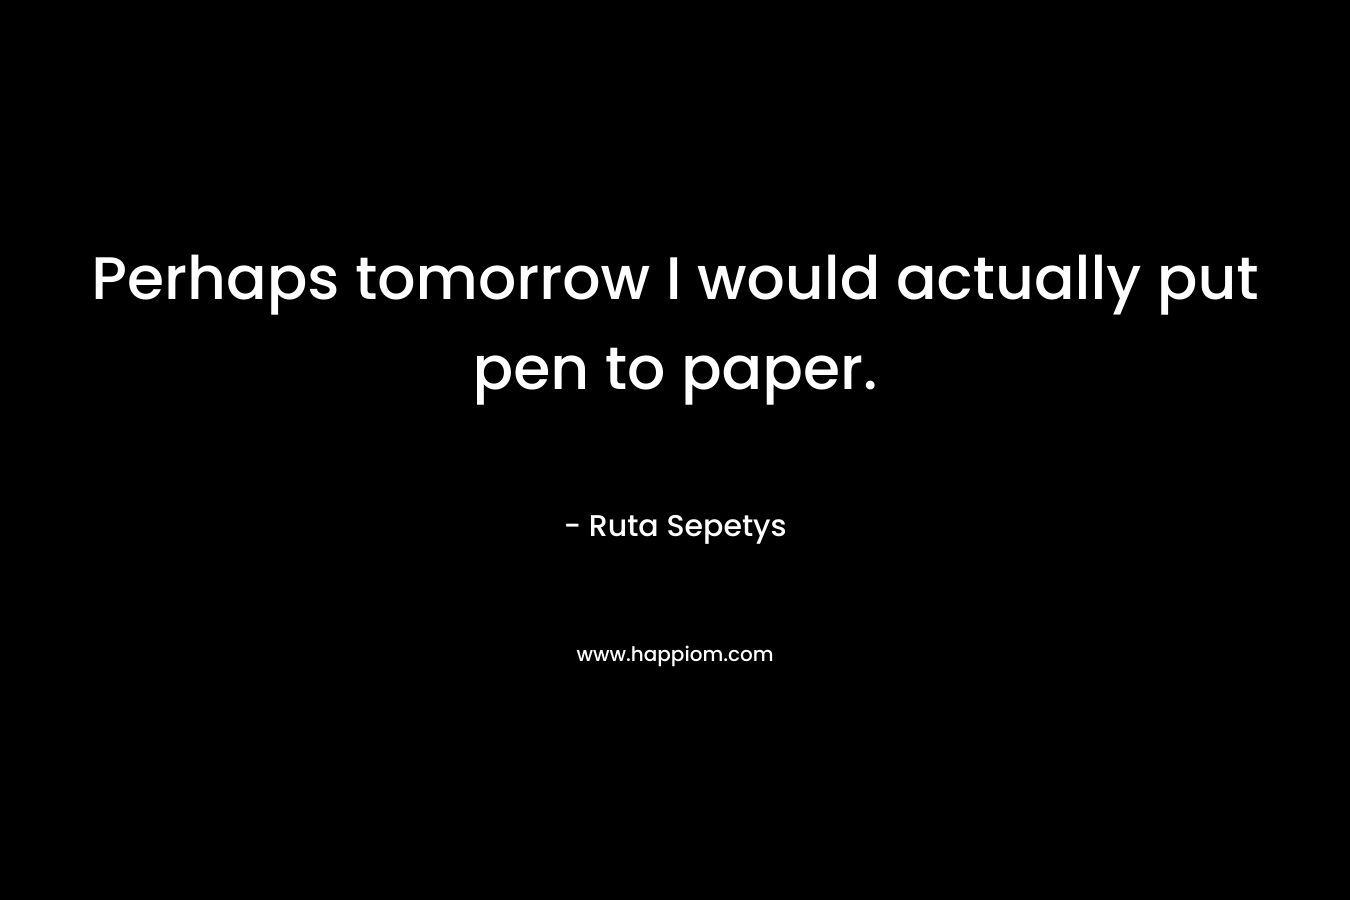 Perhaps tomorrow I would actually put pen to paper.